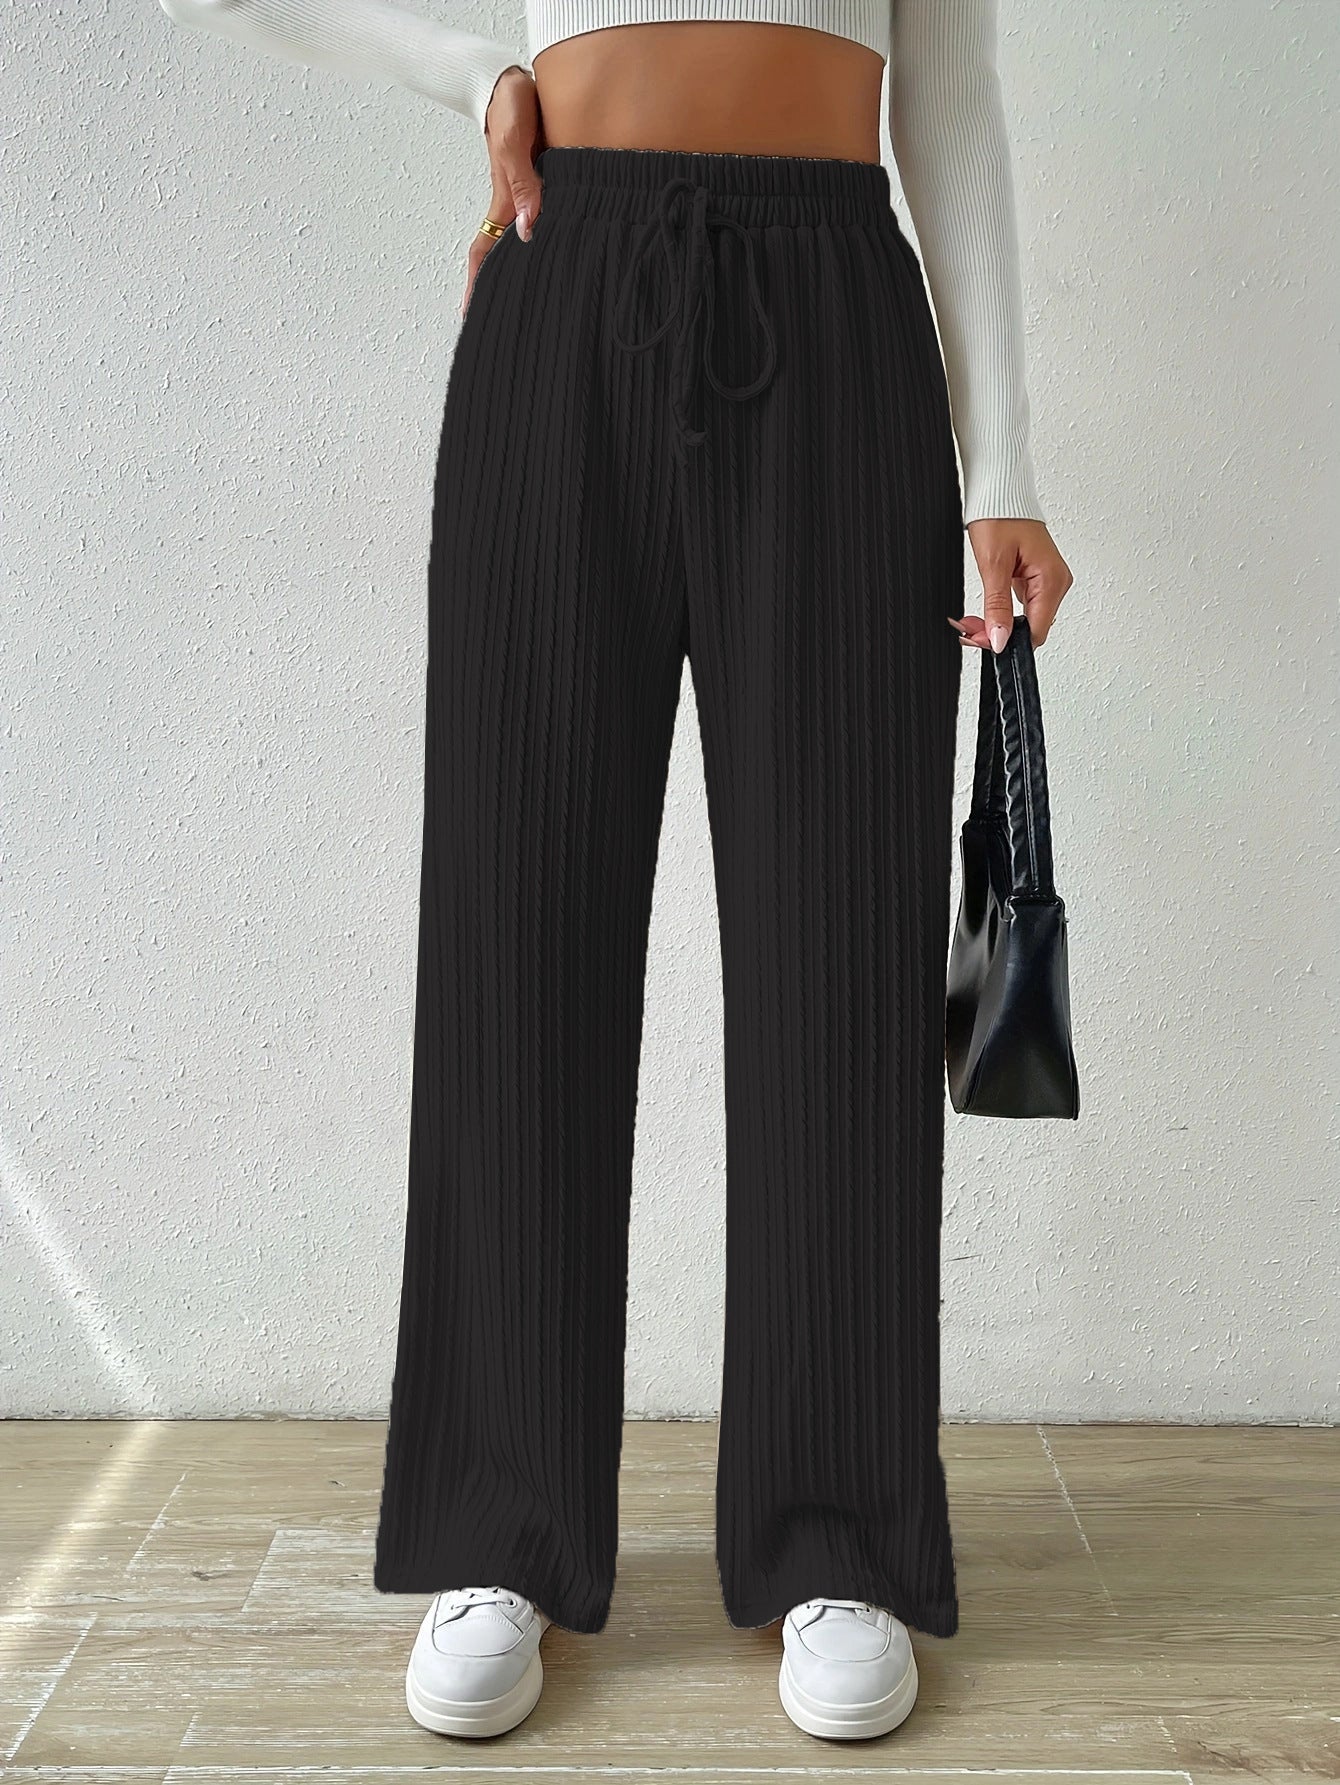 Casual Elastic High Waist Wide Legs Pants for Women-Pants-Black-S-Free Shipping Leatheretro